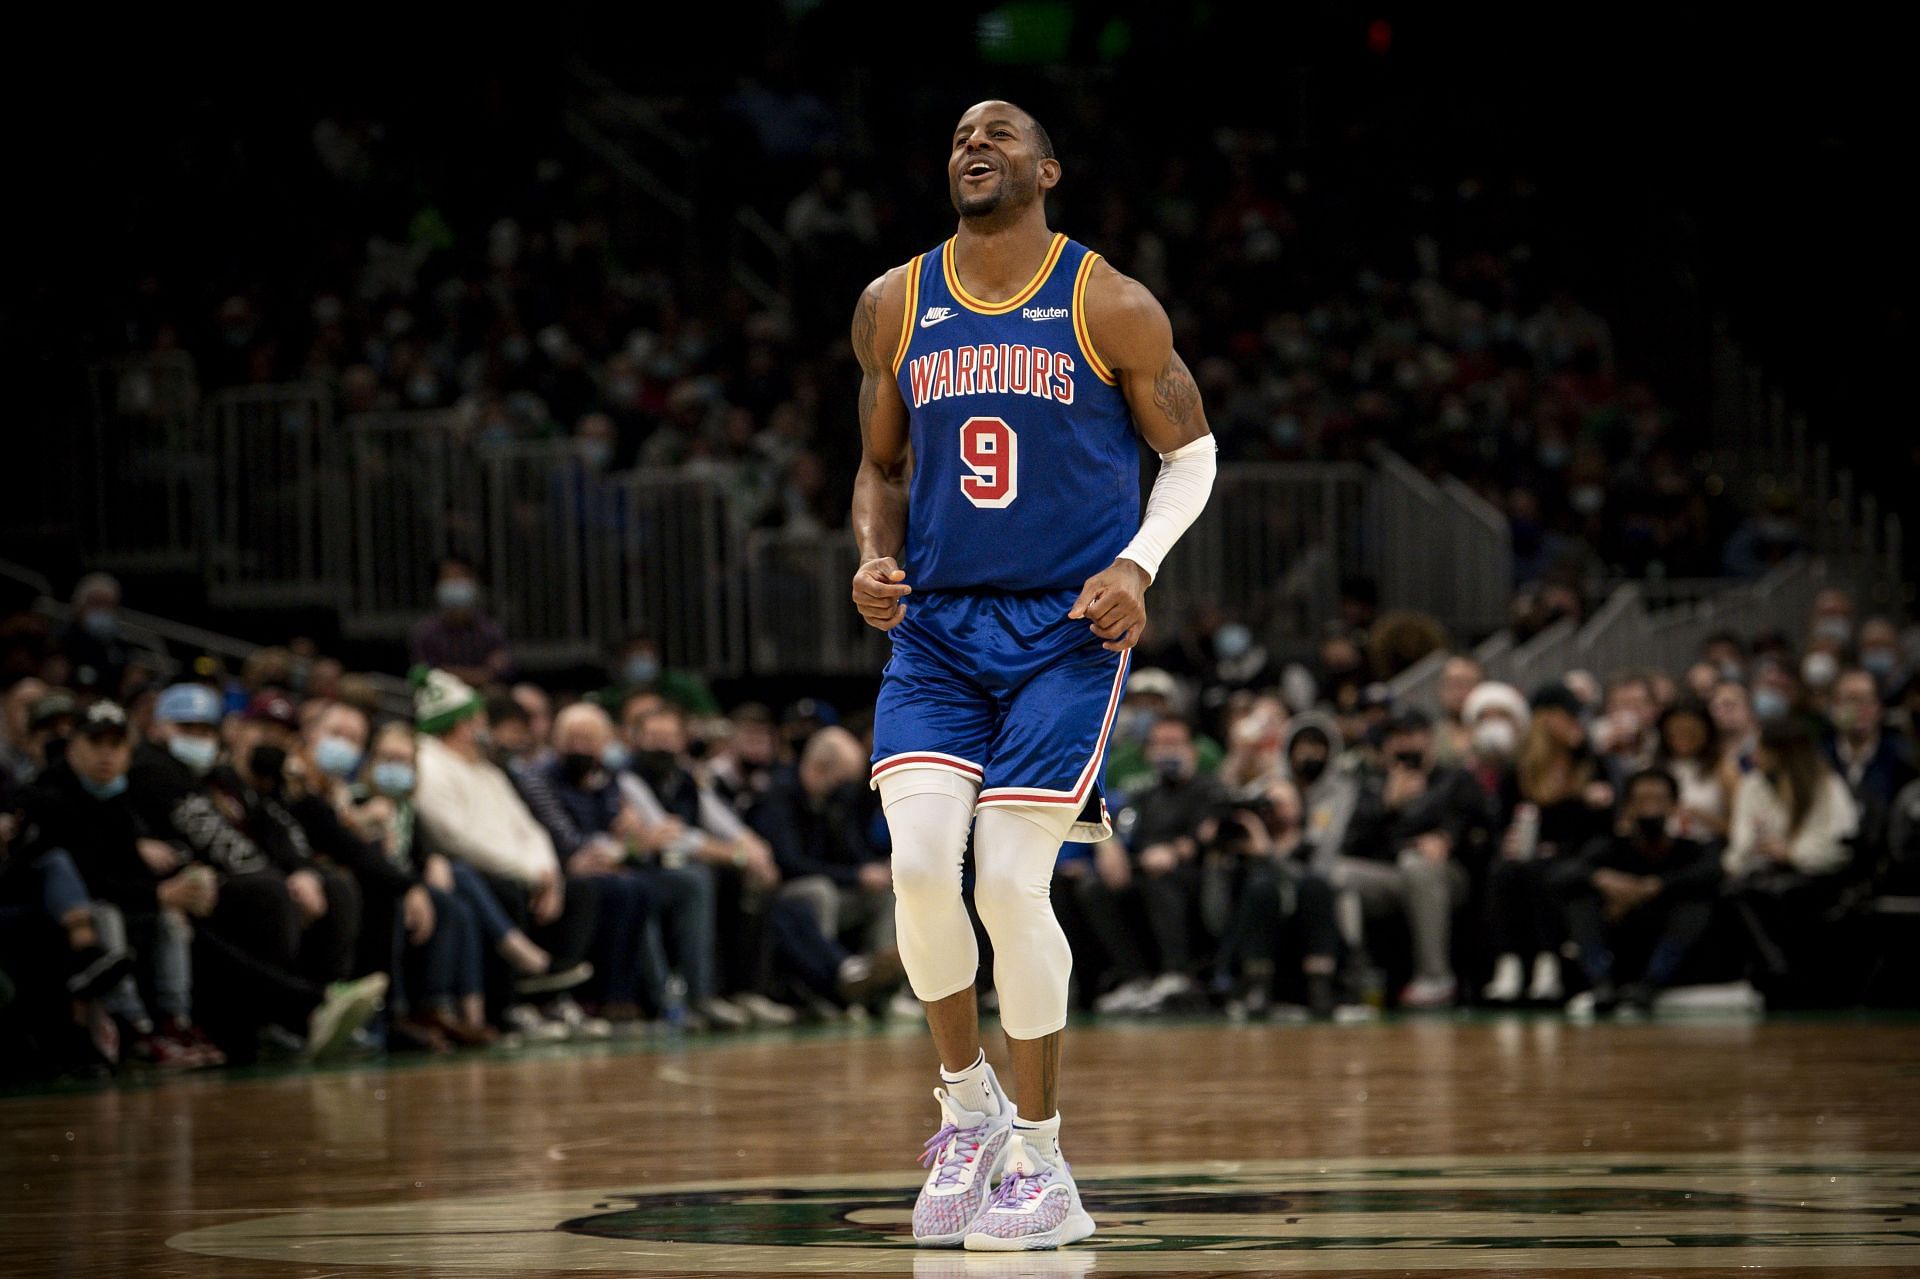 Andre Iguodala of the Golden State Warriors reacts during the first half of a game against the Boston Celtics on Dec. 17 in Boston, Massachusetts.